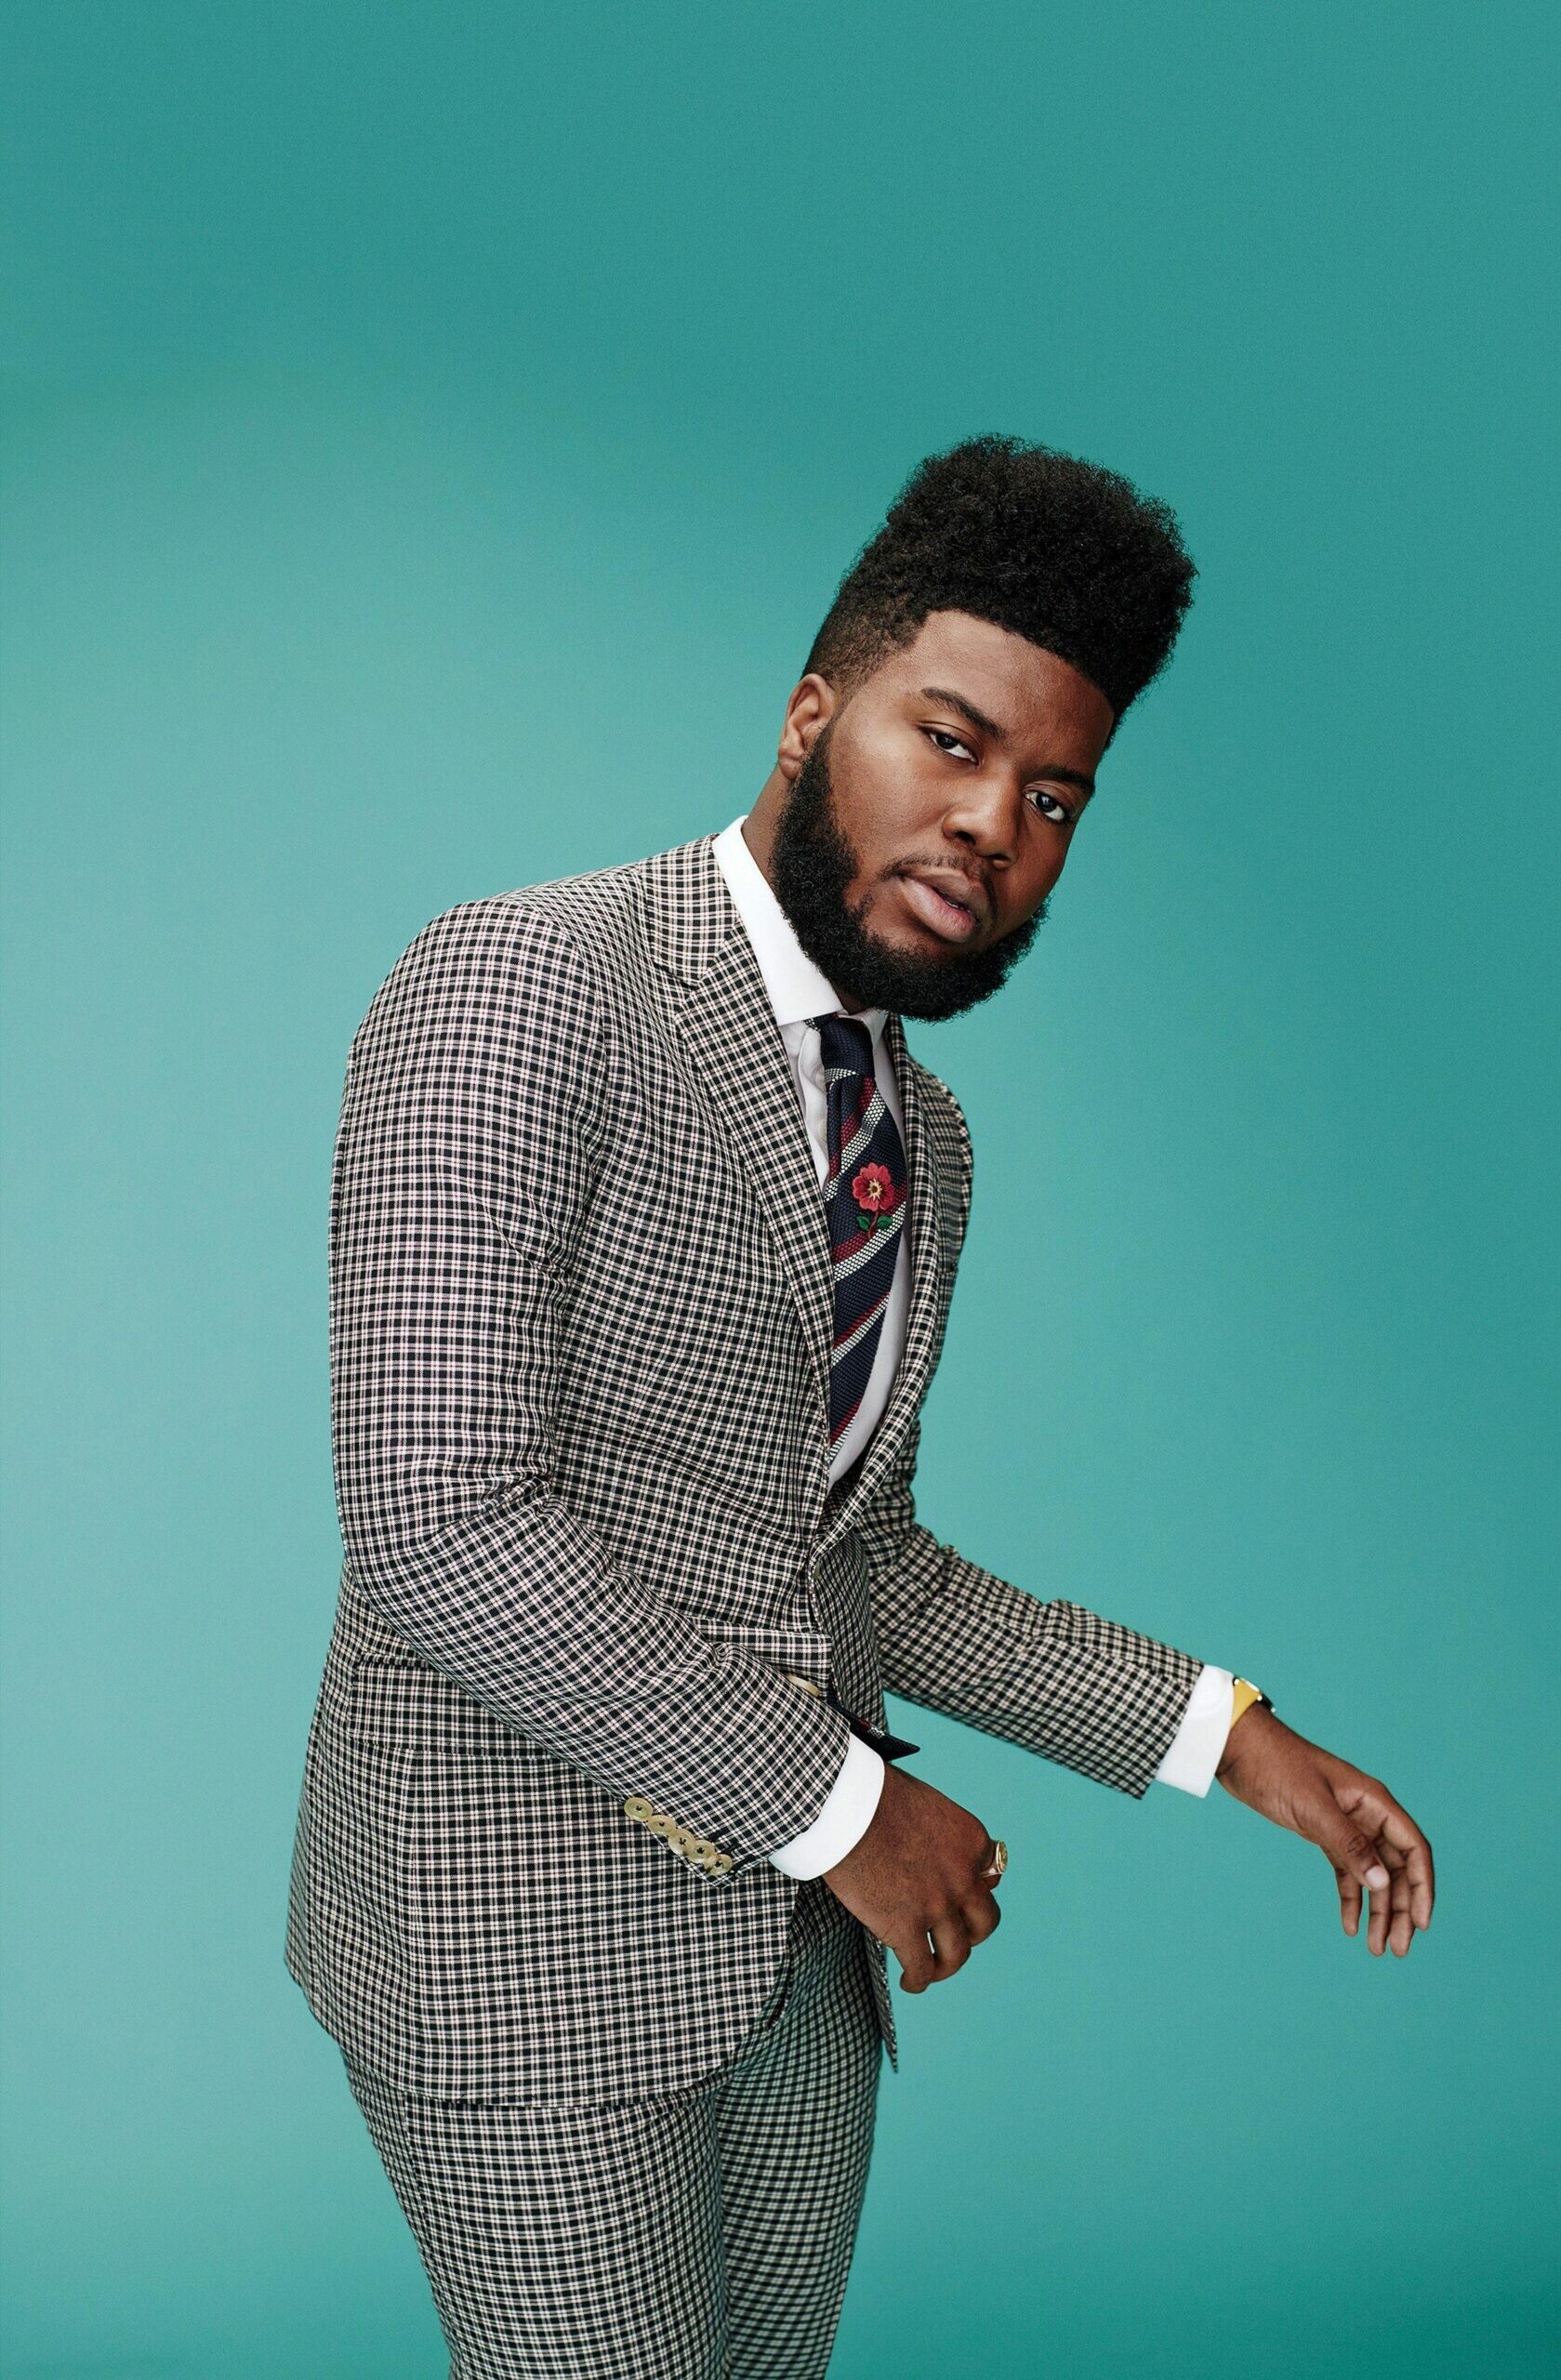 Khalid (Singer): Single "Talk", Peaked at No. 3 in the US, Grammy Award for Record of the Year nomination. 1680x2560 HD Background.